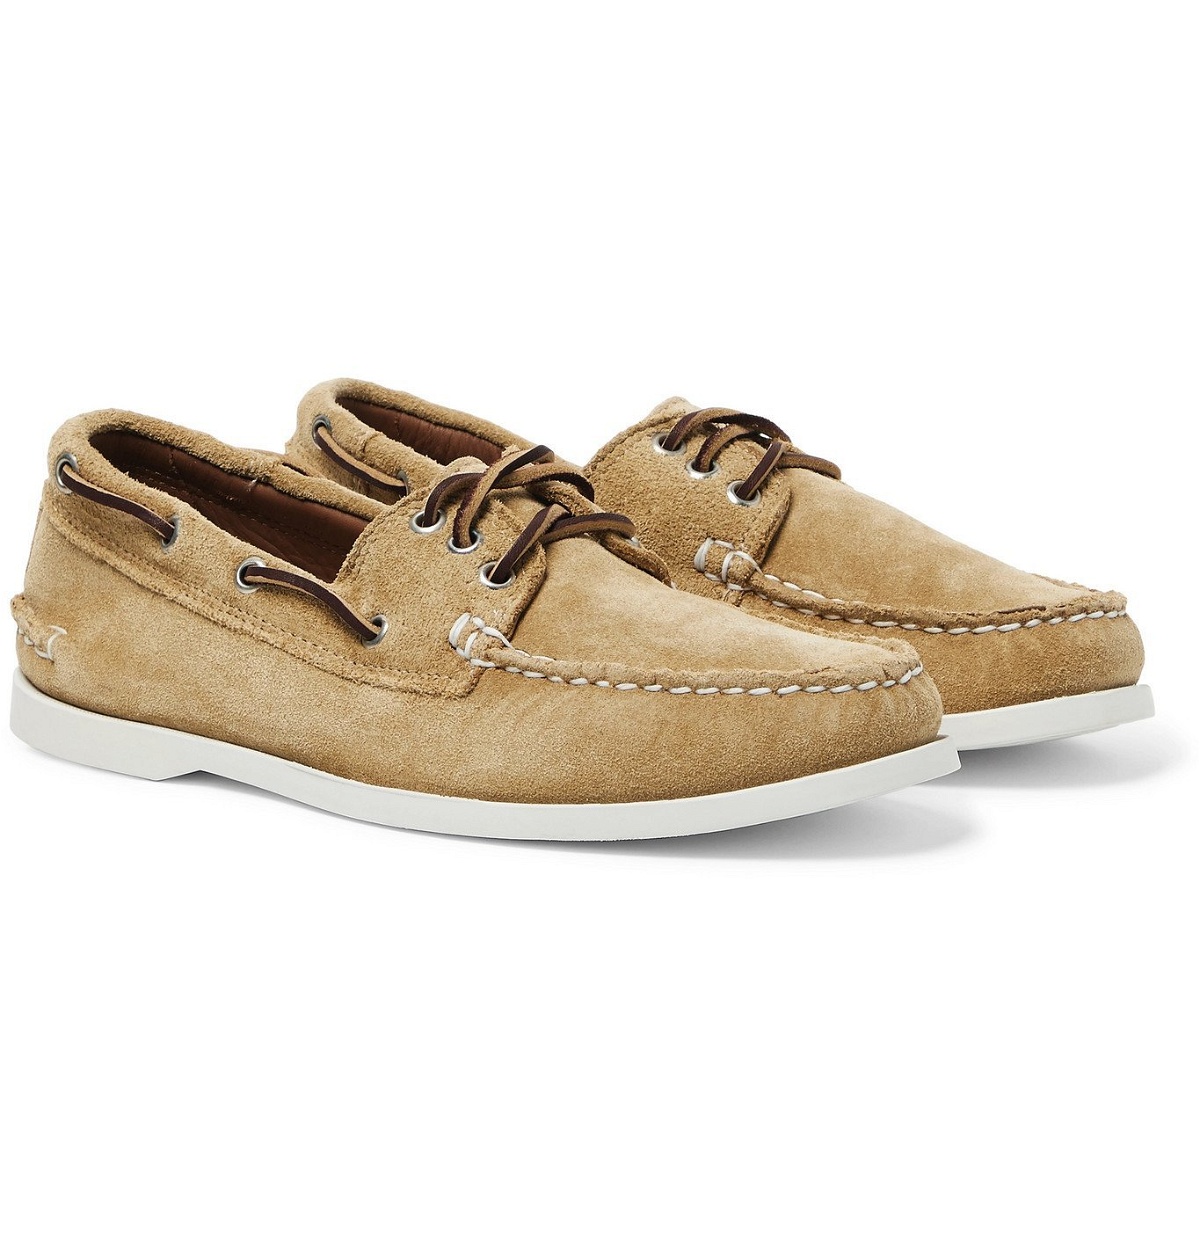 Quoddy - Downeast Suede Boat Shoes - Neutrals Quoddy